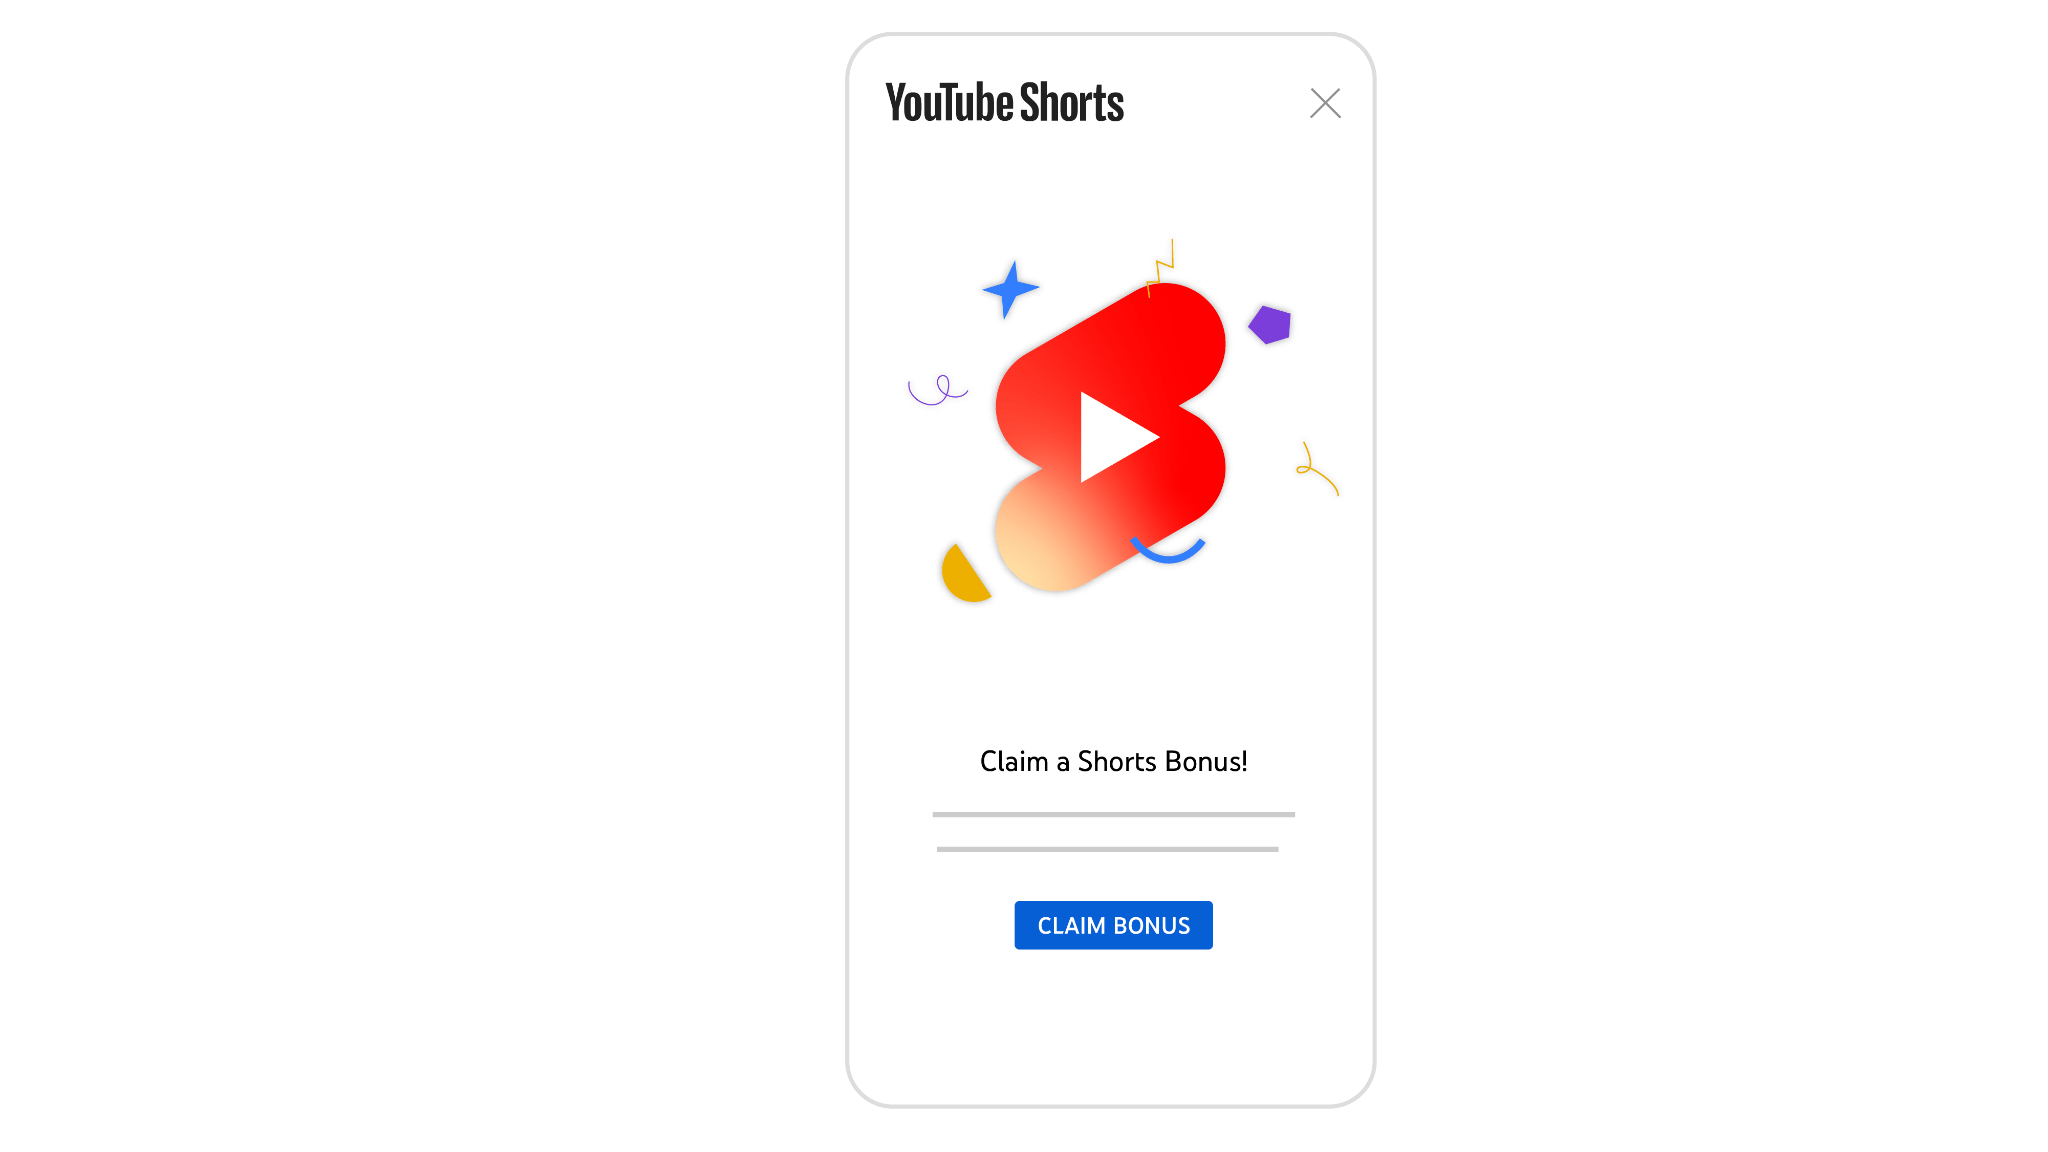 Is Pakistan Eligible For Youtube Shorts Fund - is pakistan eligible for youtube shorts fund 2